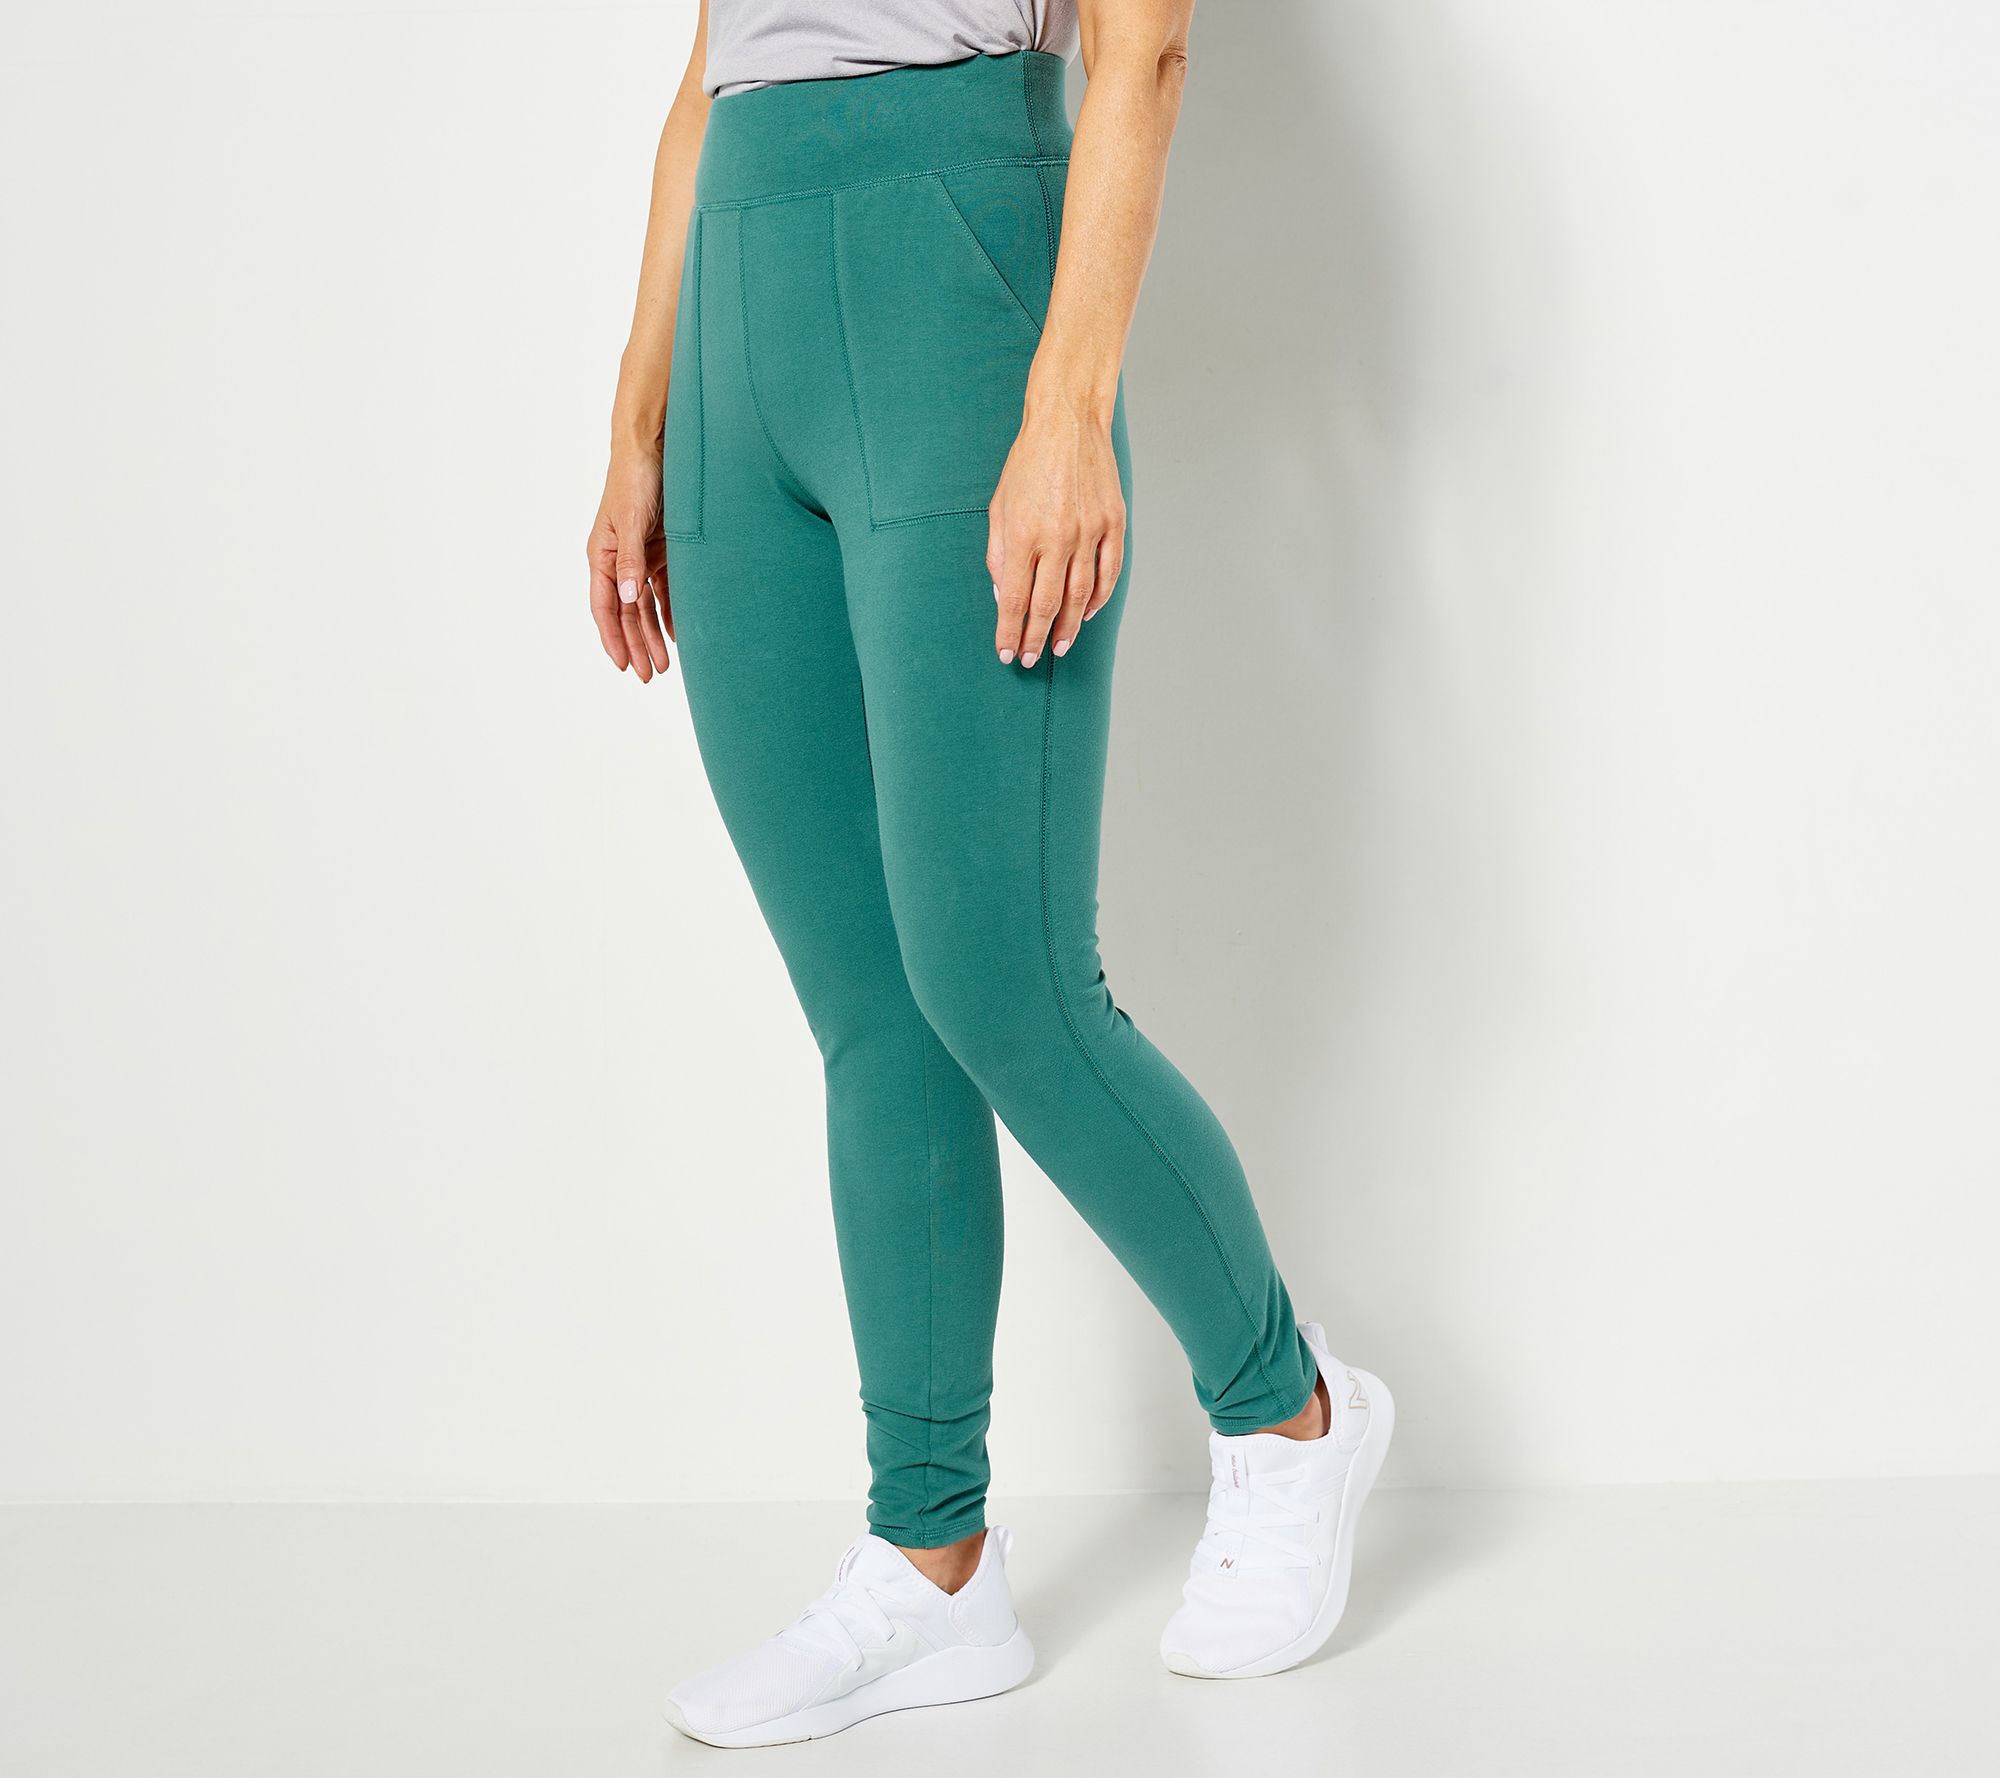 Denim & Co. Active Duo Stretch Legging with Wide Waistband 